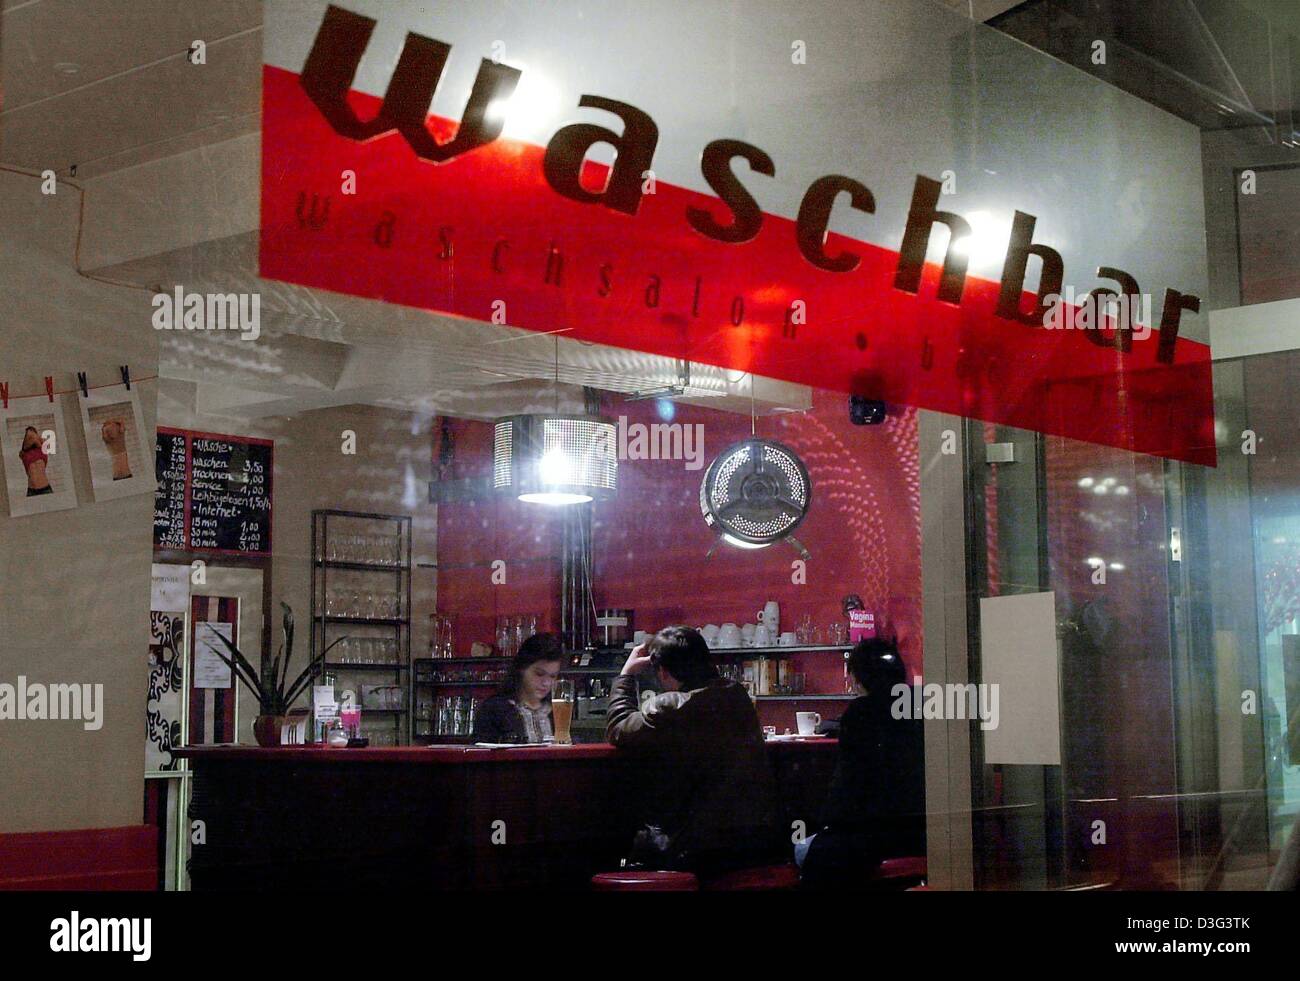 (dpa) - Customers and visitors sit at a bar at a launderette in Ruesselsheim, Germany, 18 February 2003. A lamp in the shape of a washing mashine barrel is hanging down from the ceiling. Above the bar hangs a sign which reads 'Washbar'. Local artists have been running the launderette, the 'Waschbar', for almost two years. It also functions as an exhibition space for their works of  Stock Photo